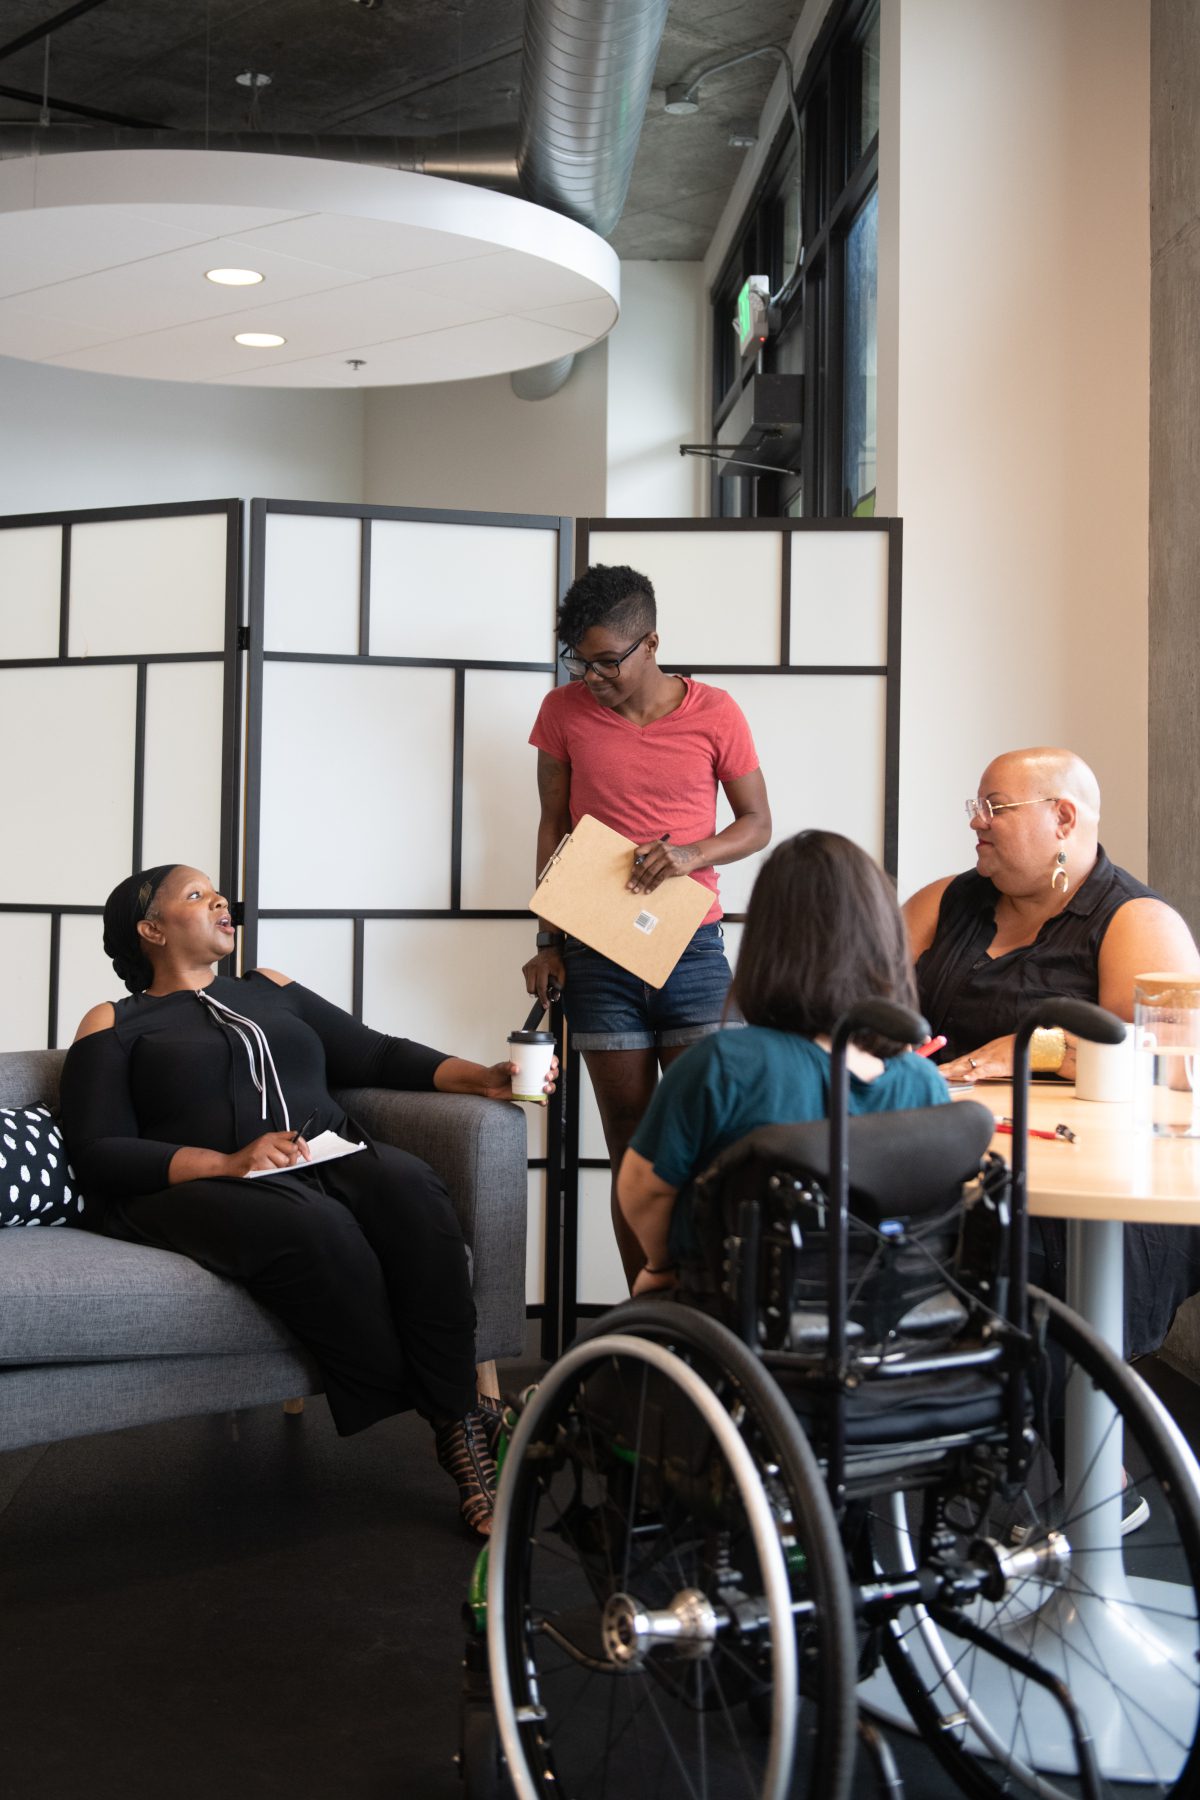 Four disabled people of color gather around a table during a meeting. A Black woman sitting on a couch gestures and speaks while the three others (a South Asian person sitting in a wheelchair, a Black non-binary person sitting in a chair, and a Black non-binary person standing with a clipboard and cane) face her and listen.